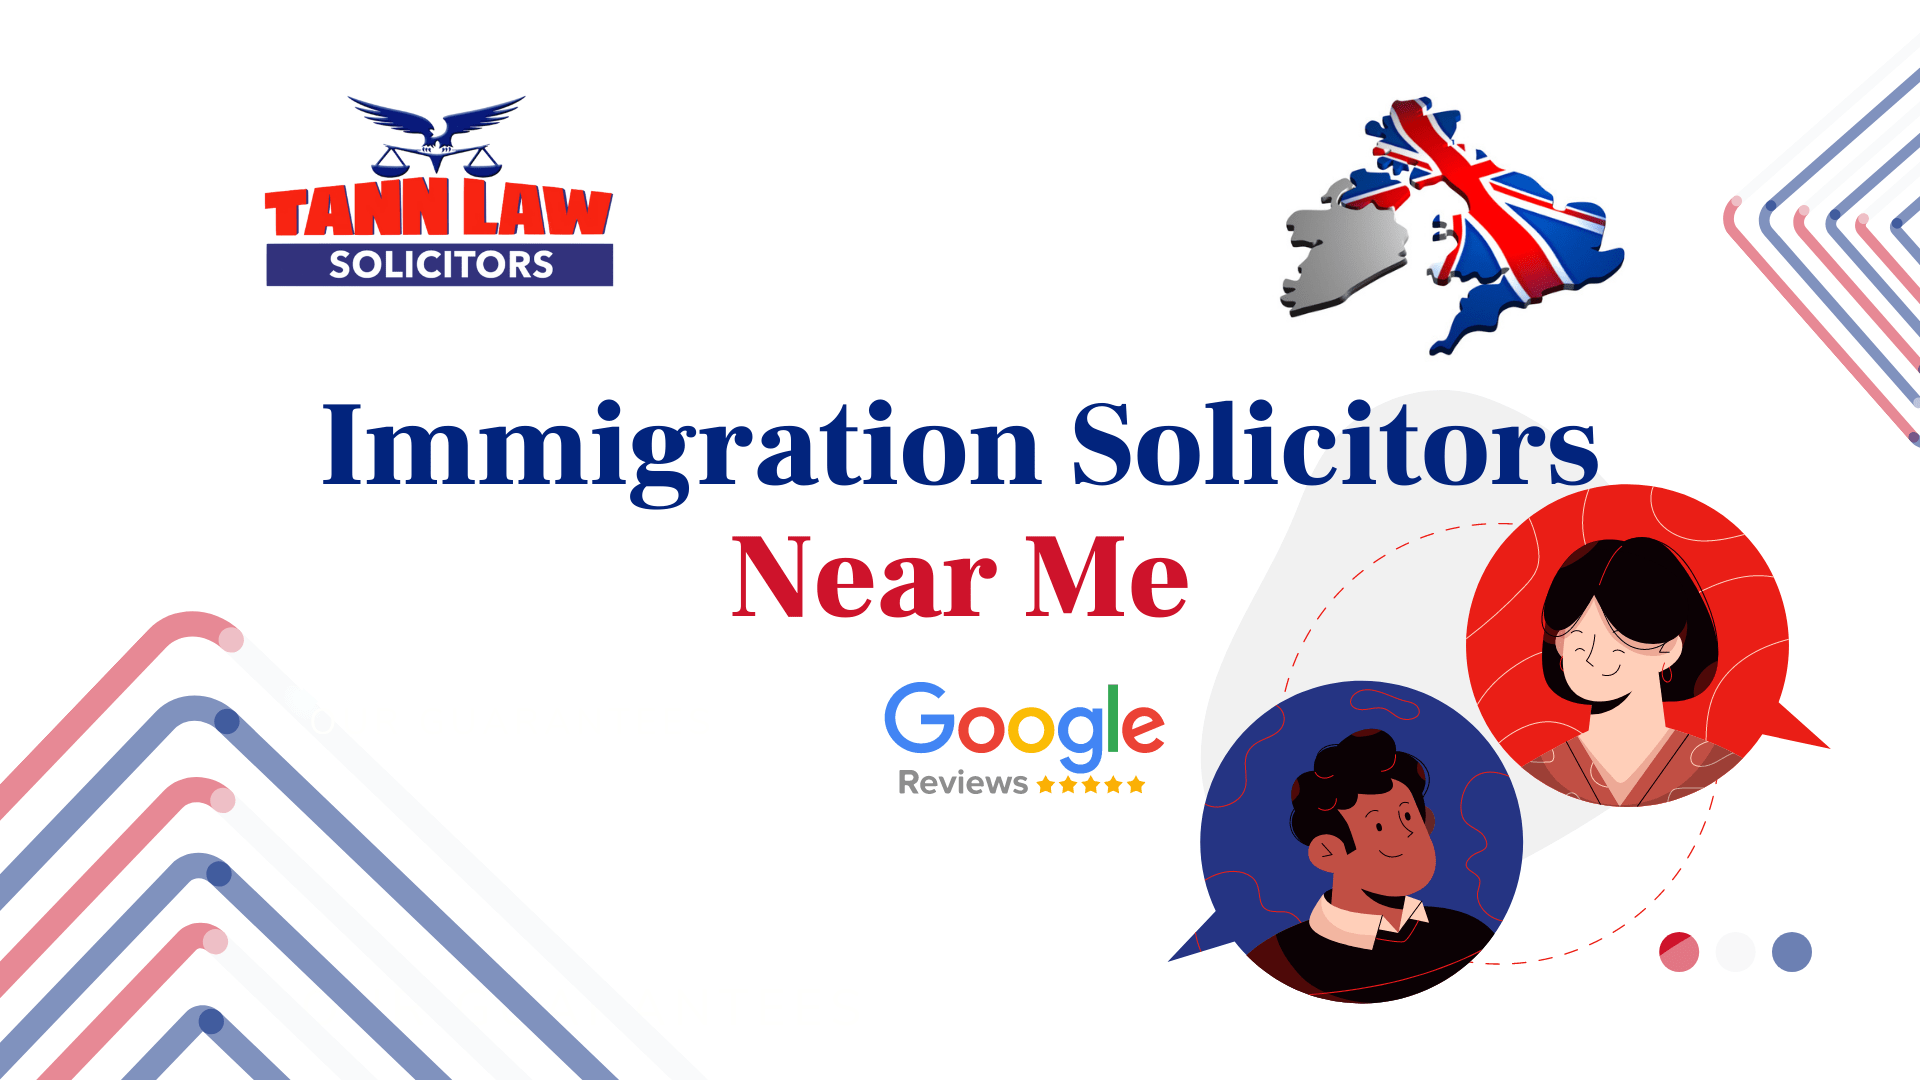 Immigration Solicitors Near Me